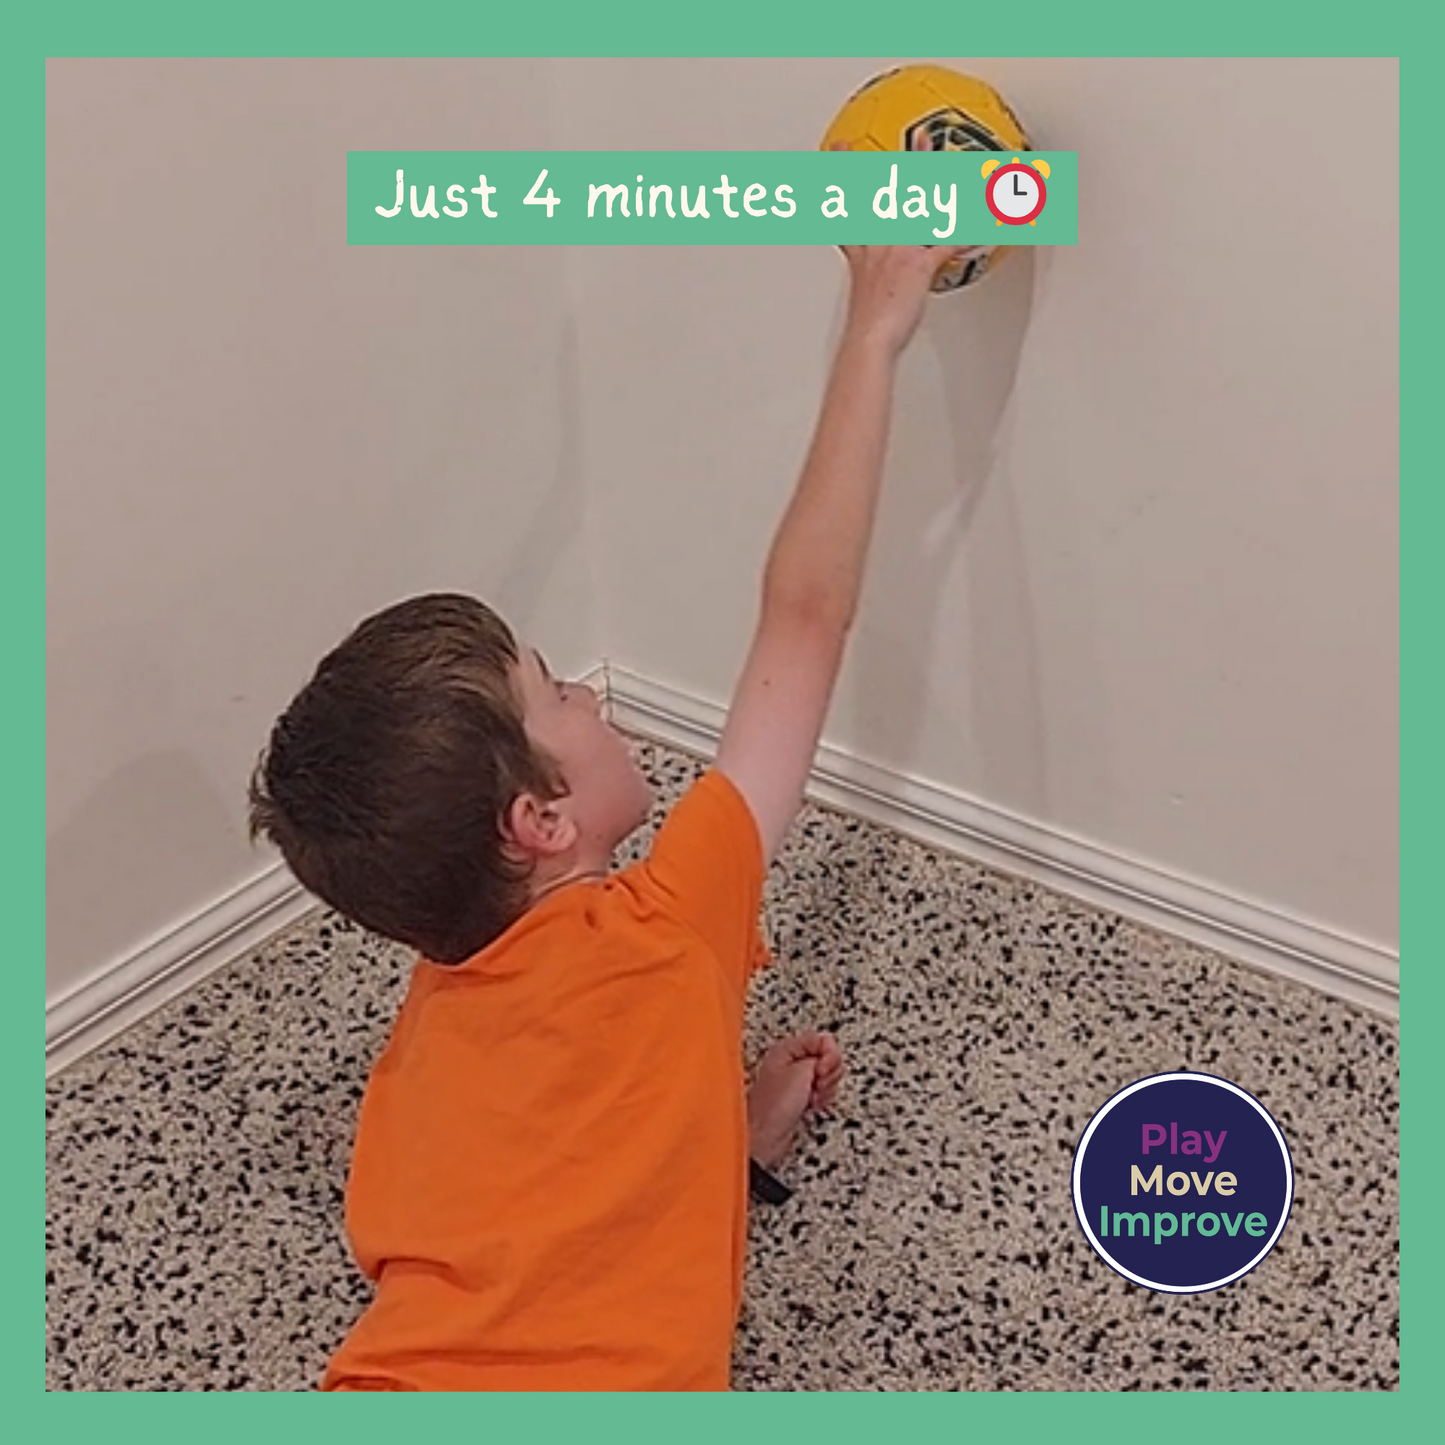 31 day kids movement challenge - Only 4 minutes per day